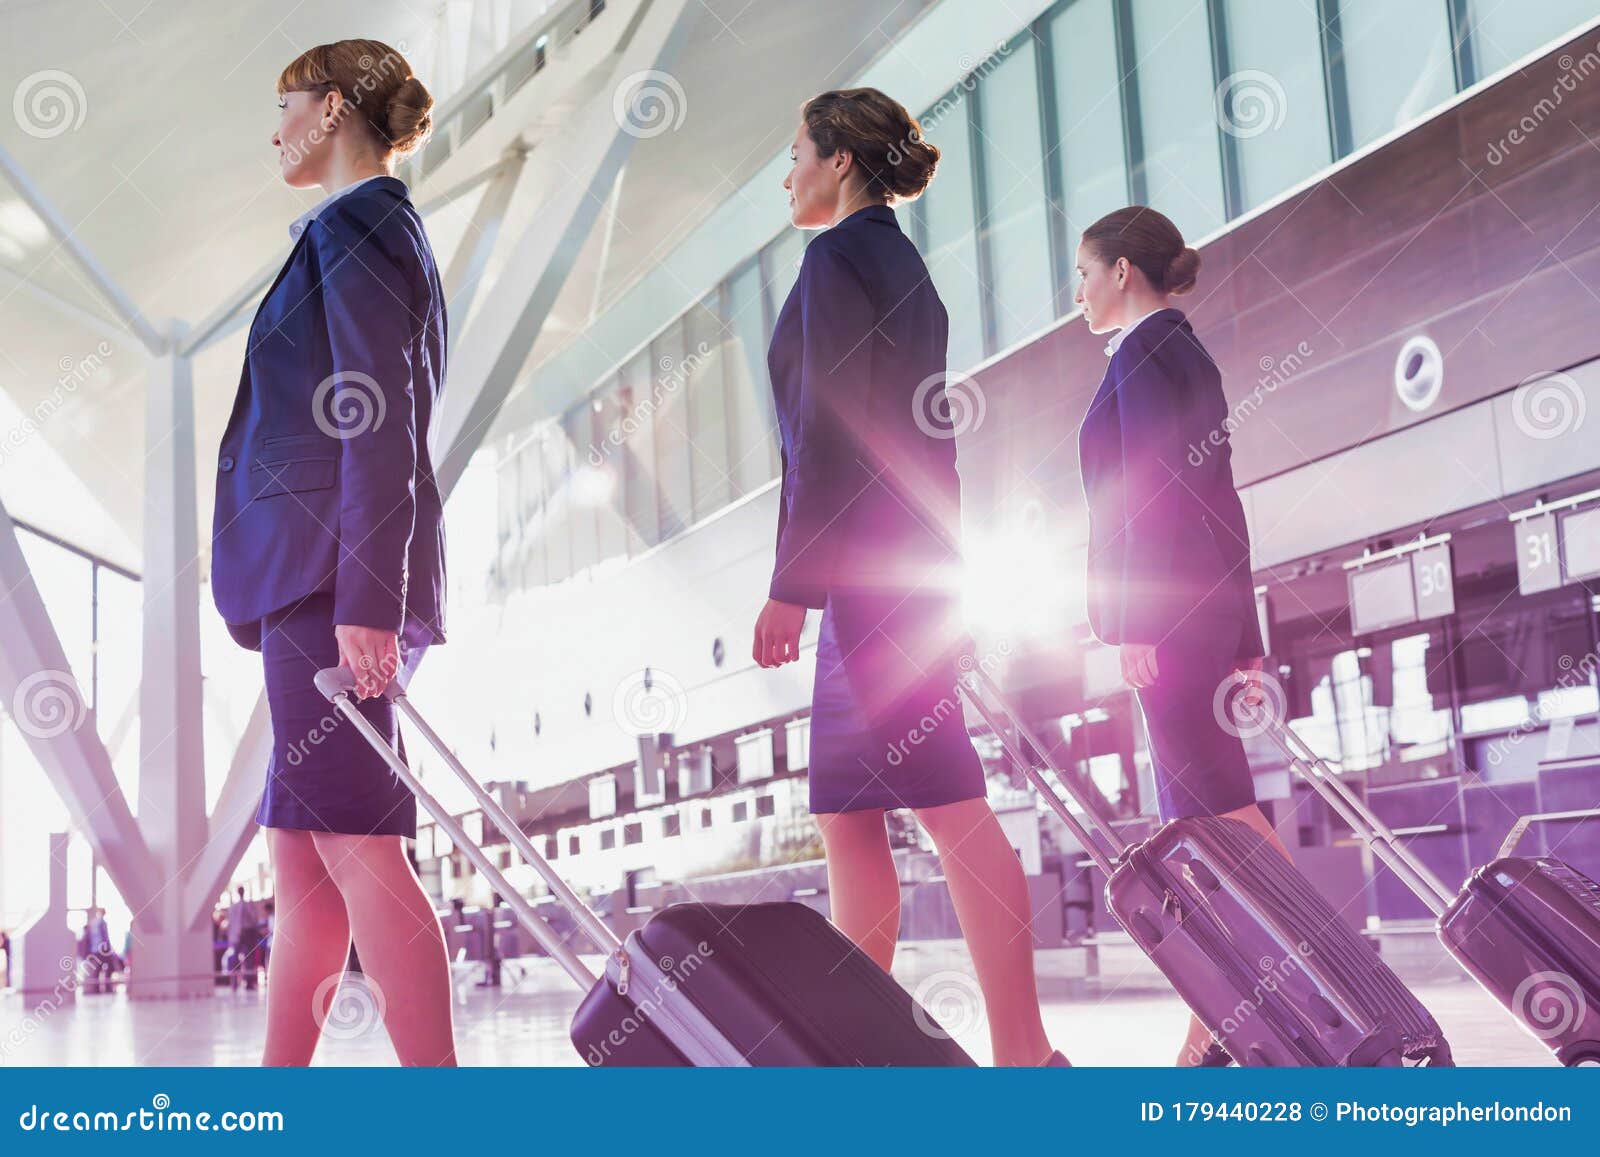 portrait of young beautiful confident flight attendants walking in airport